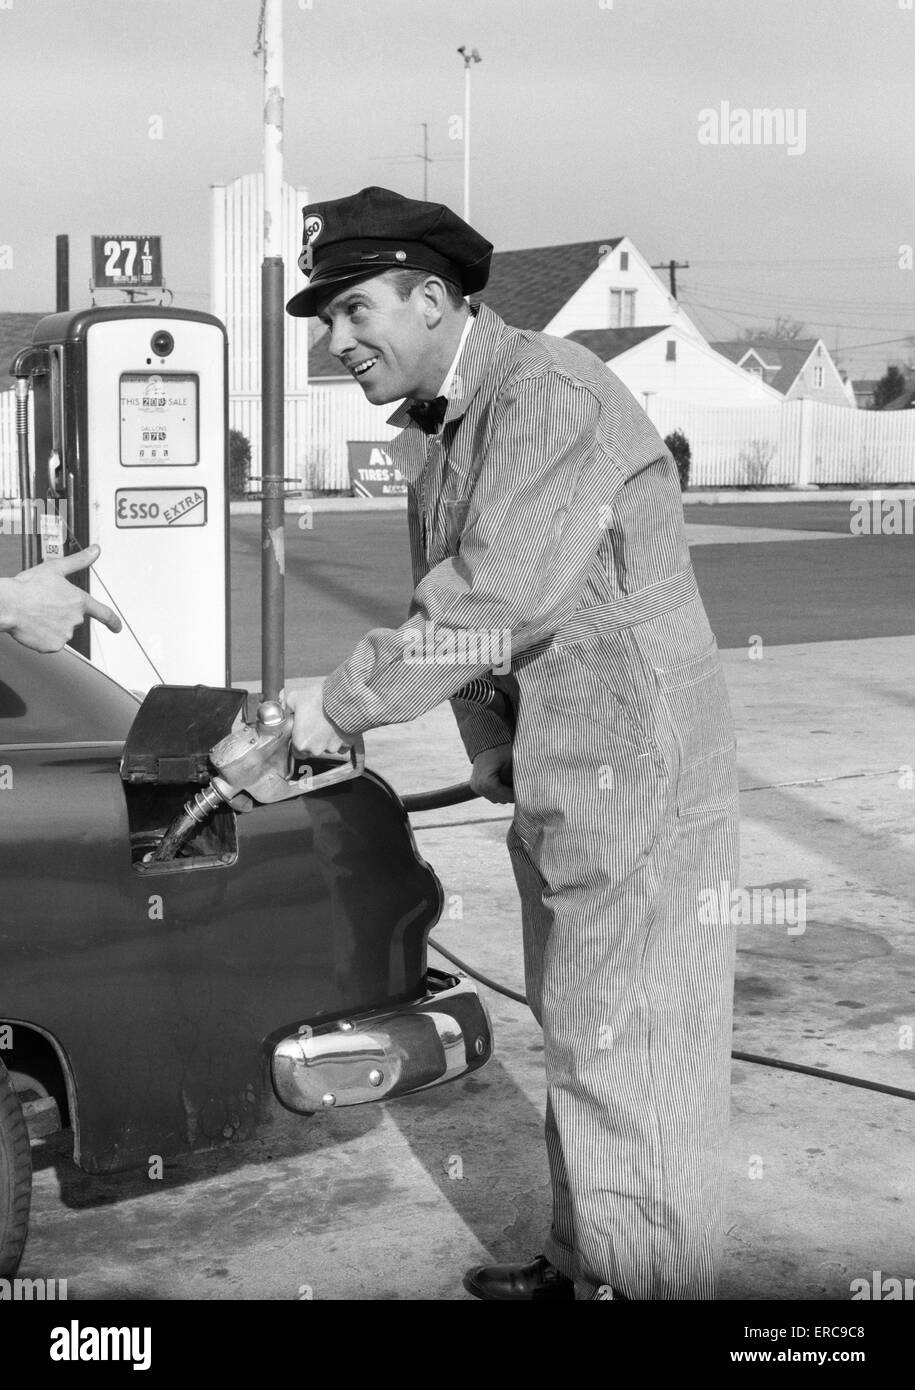 1950s SERVICE STATION ATTENDANT MAN IN STRIPED OVERALLS & CAP FILLING GAS TANK OF AUTOMOBILE Stock Photo